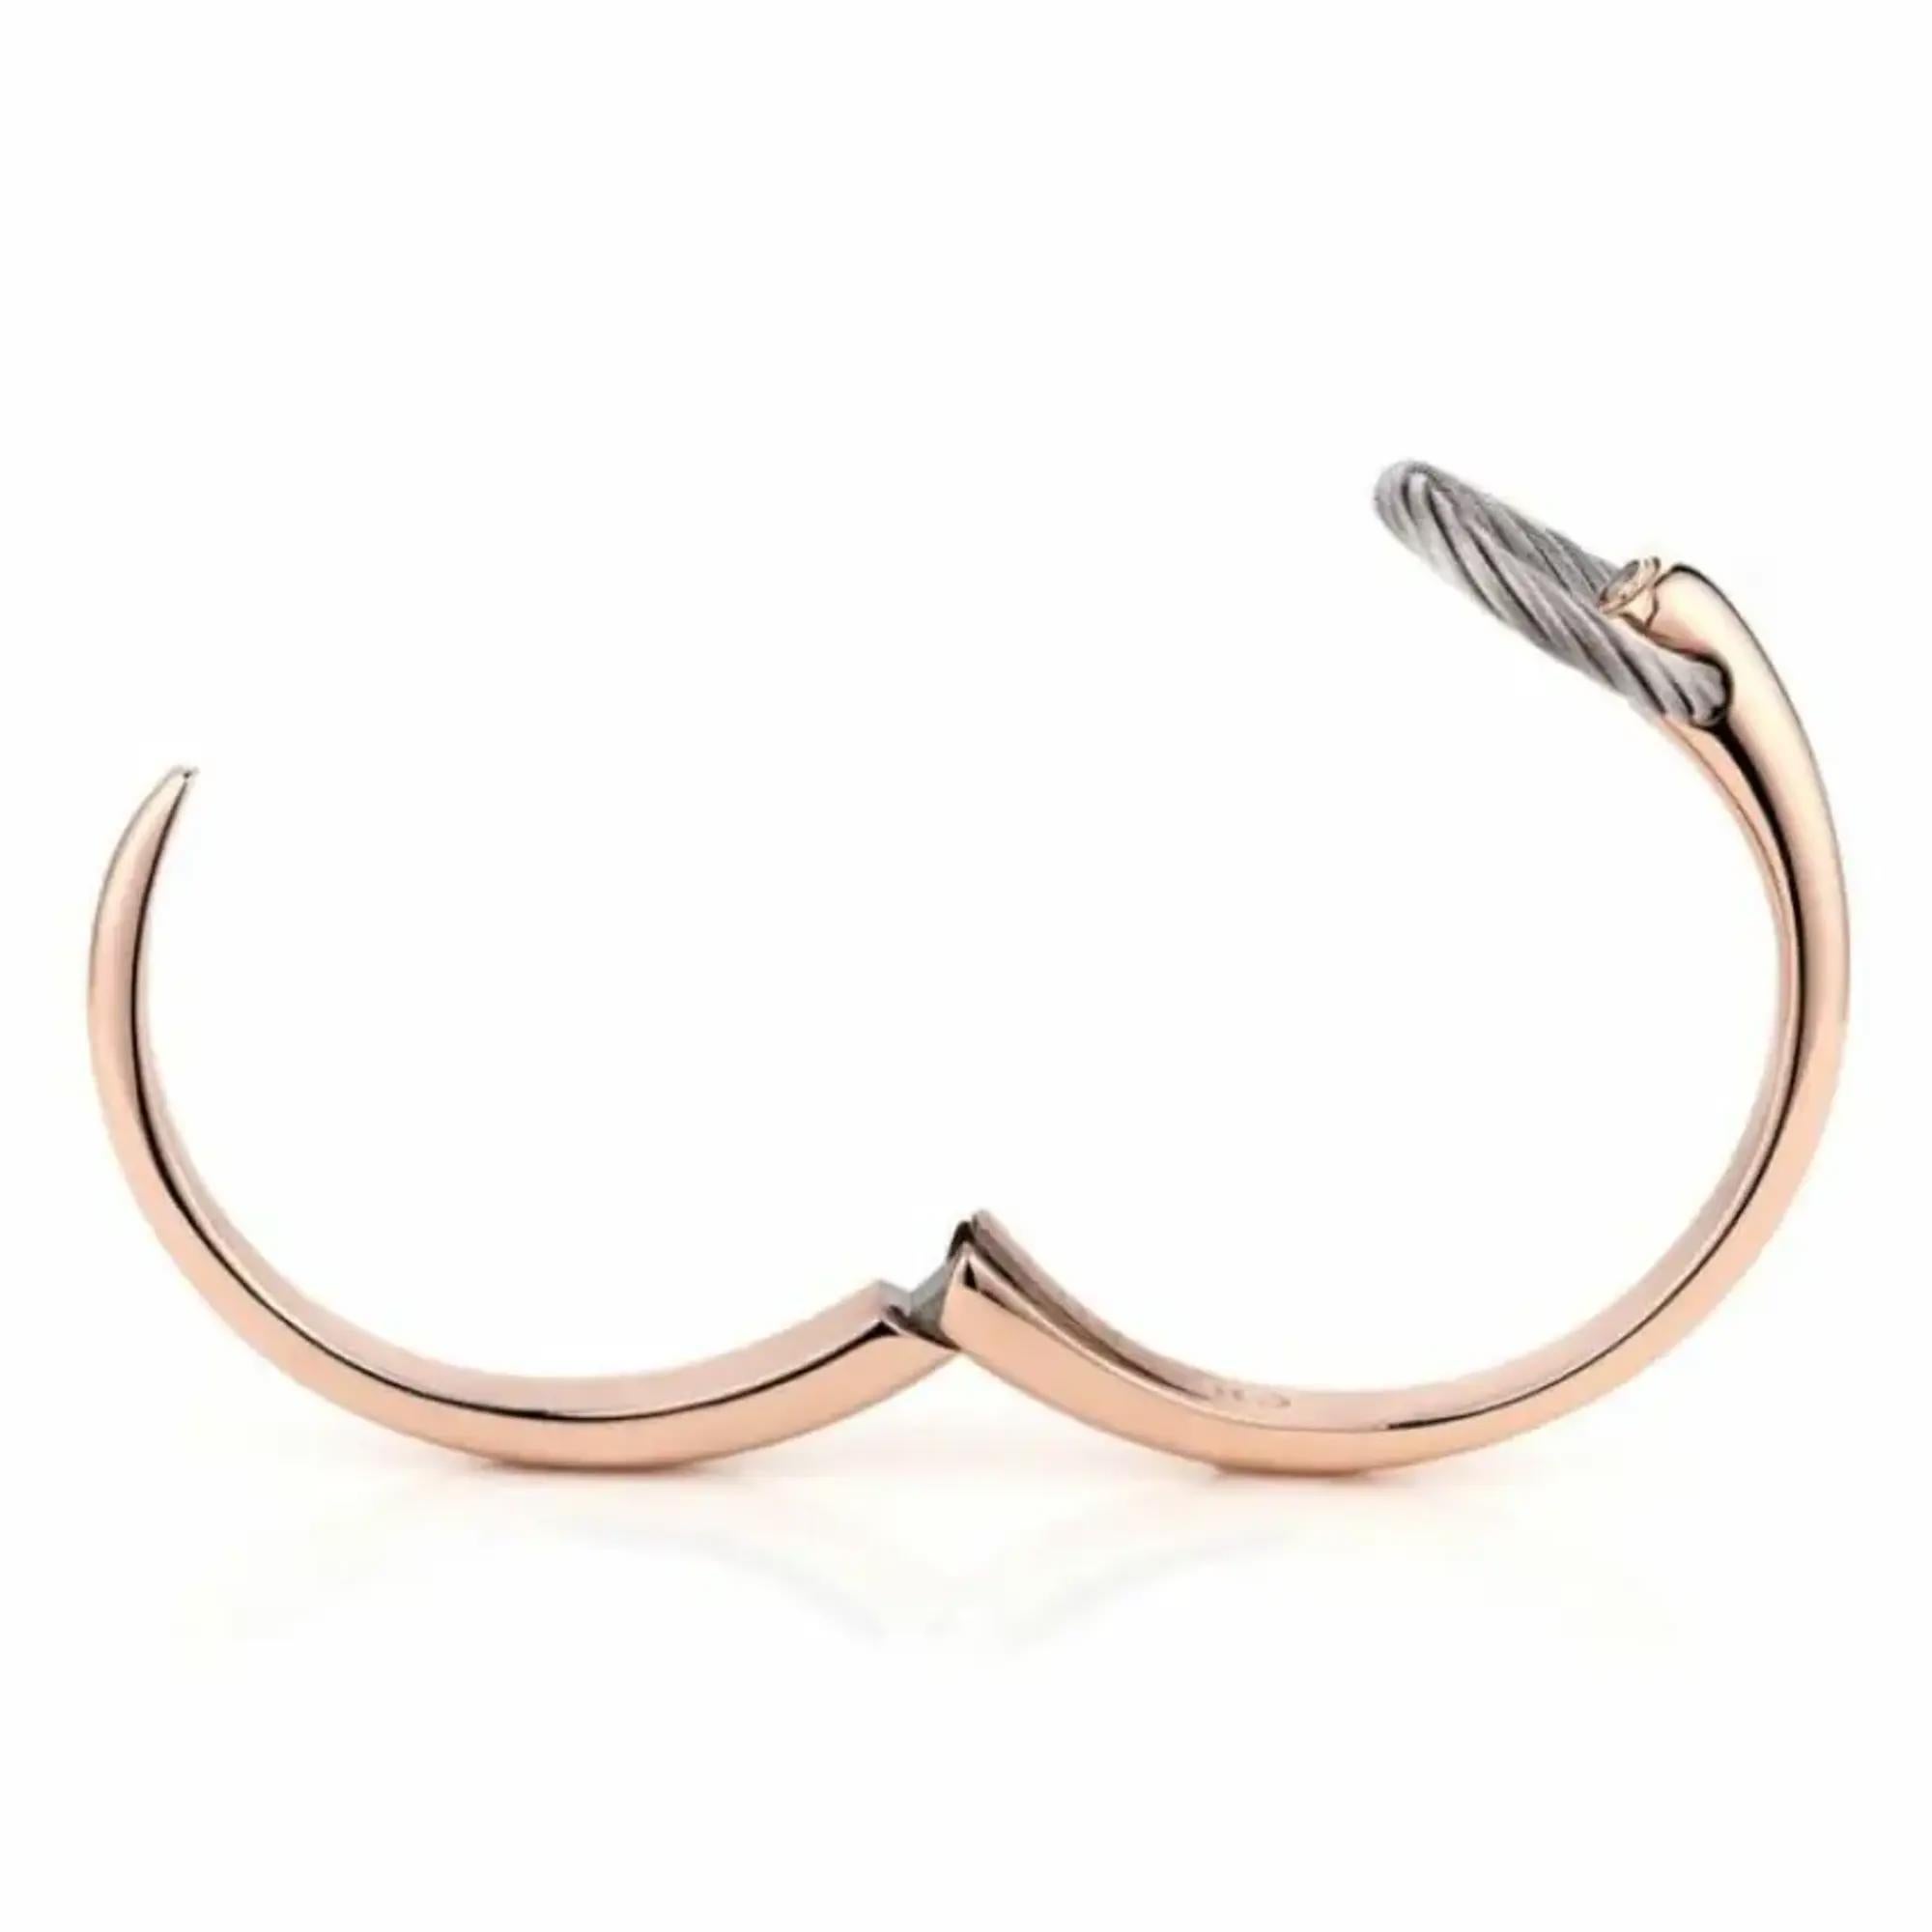 Charriol Infinity Zen Rose Gold PVD Steel Cable Bangle 04-102-1232-0 Taille M Neuf - En vente à New York, NY